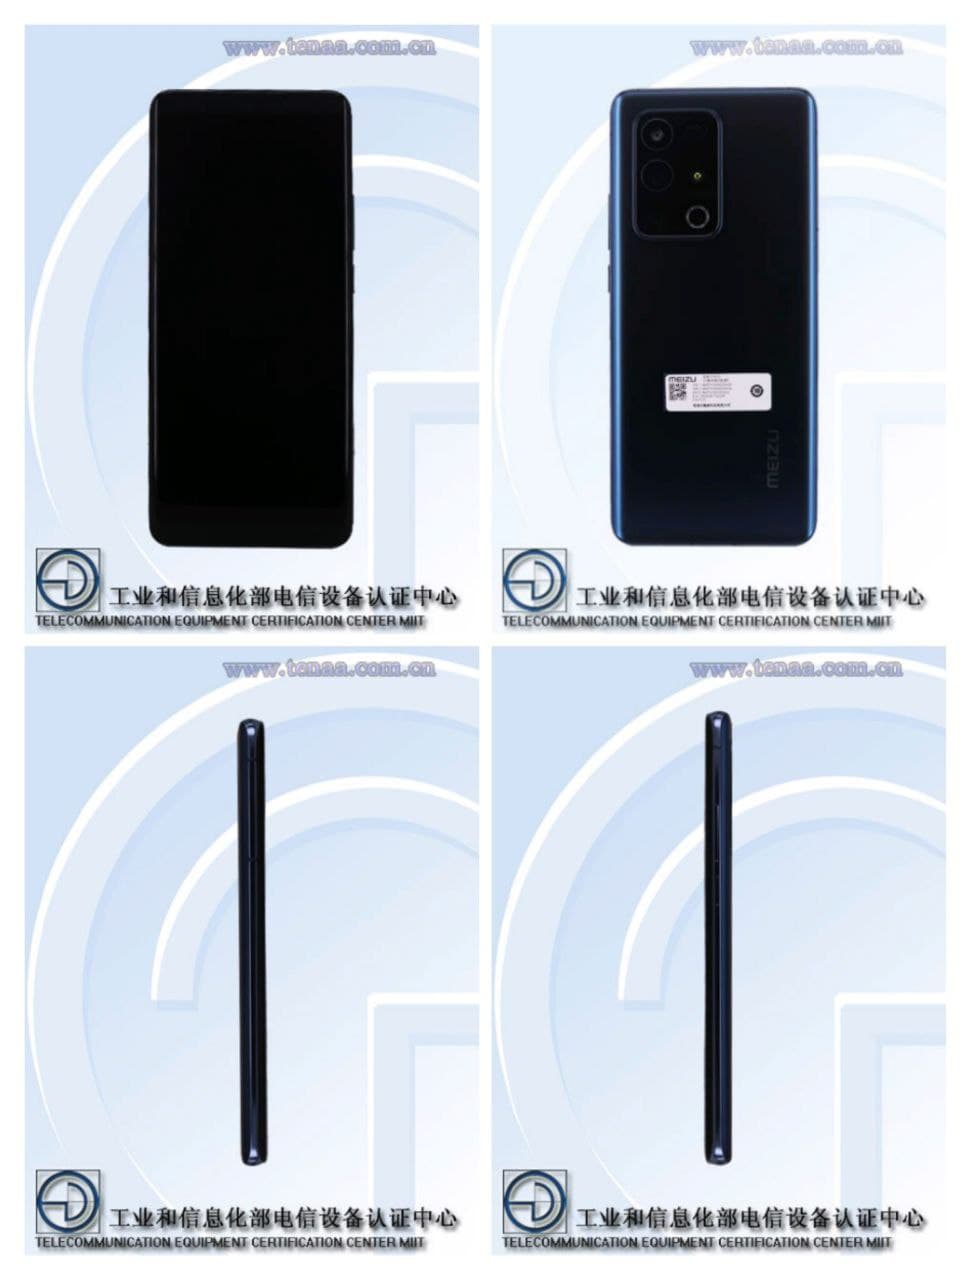 Meizu M182Q and M192Q listed on TENAA Certification - Here are their key Specifications.